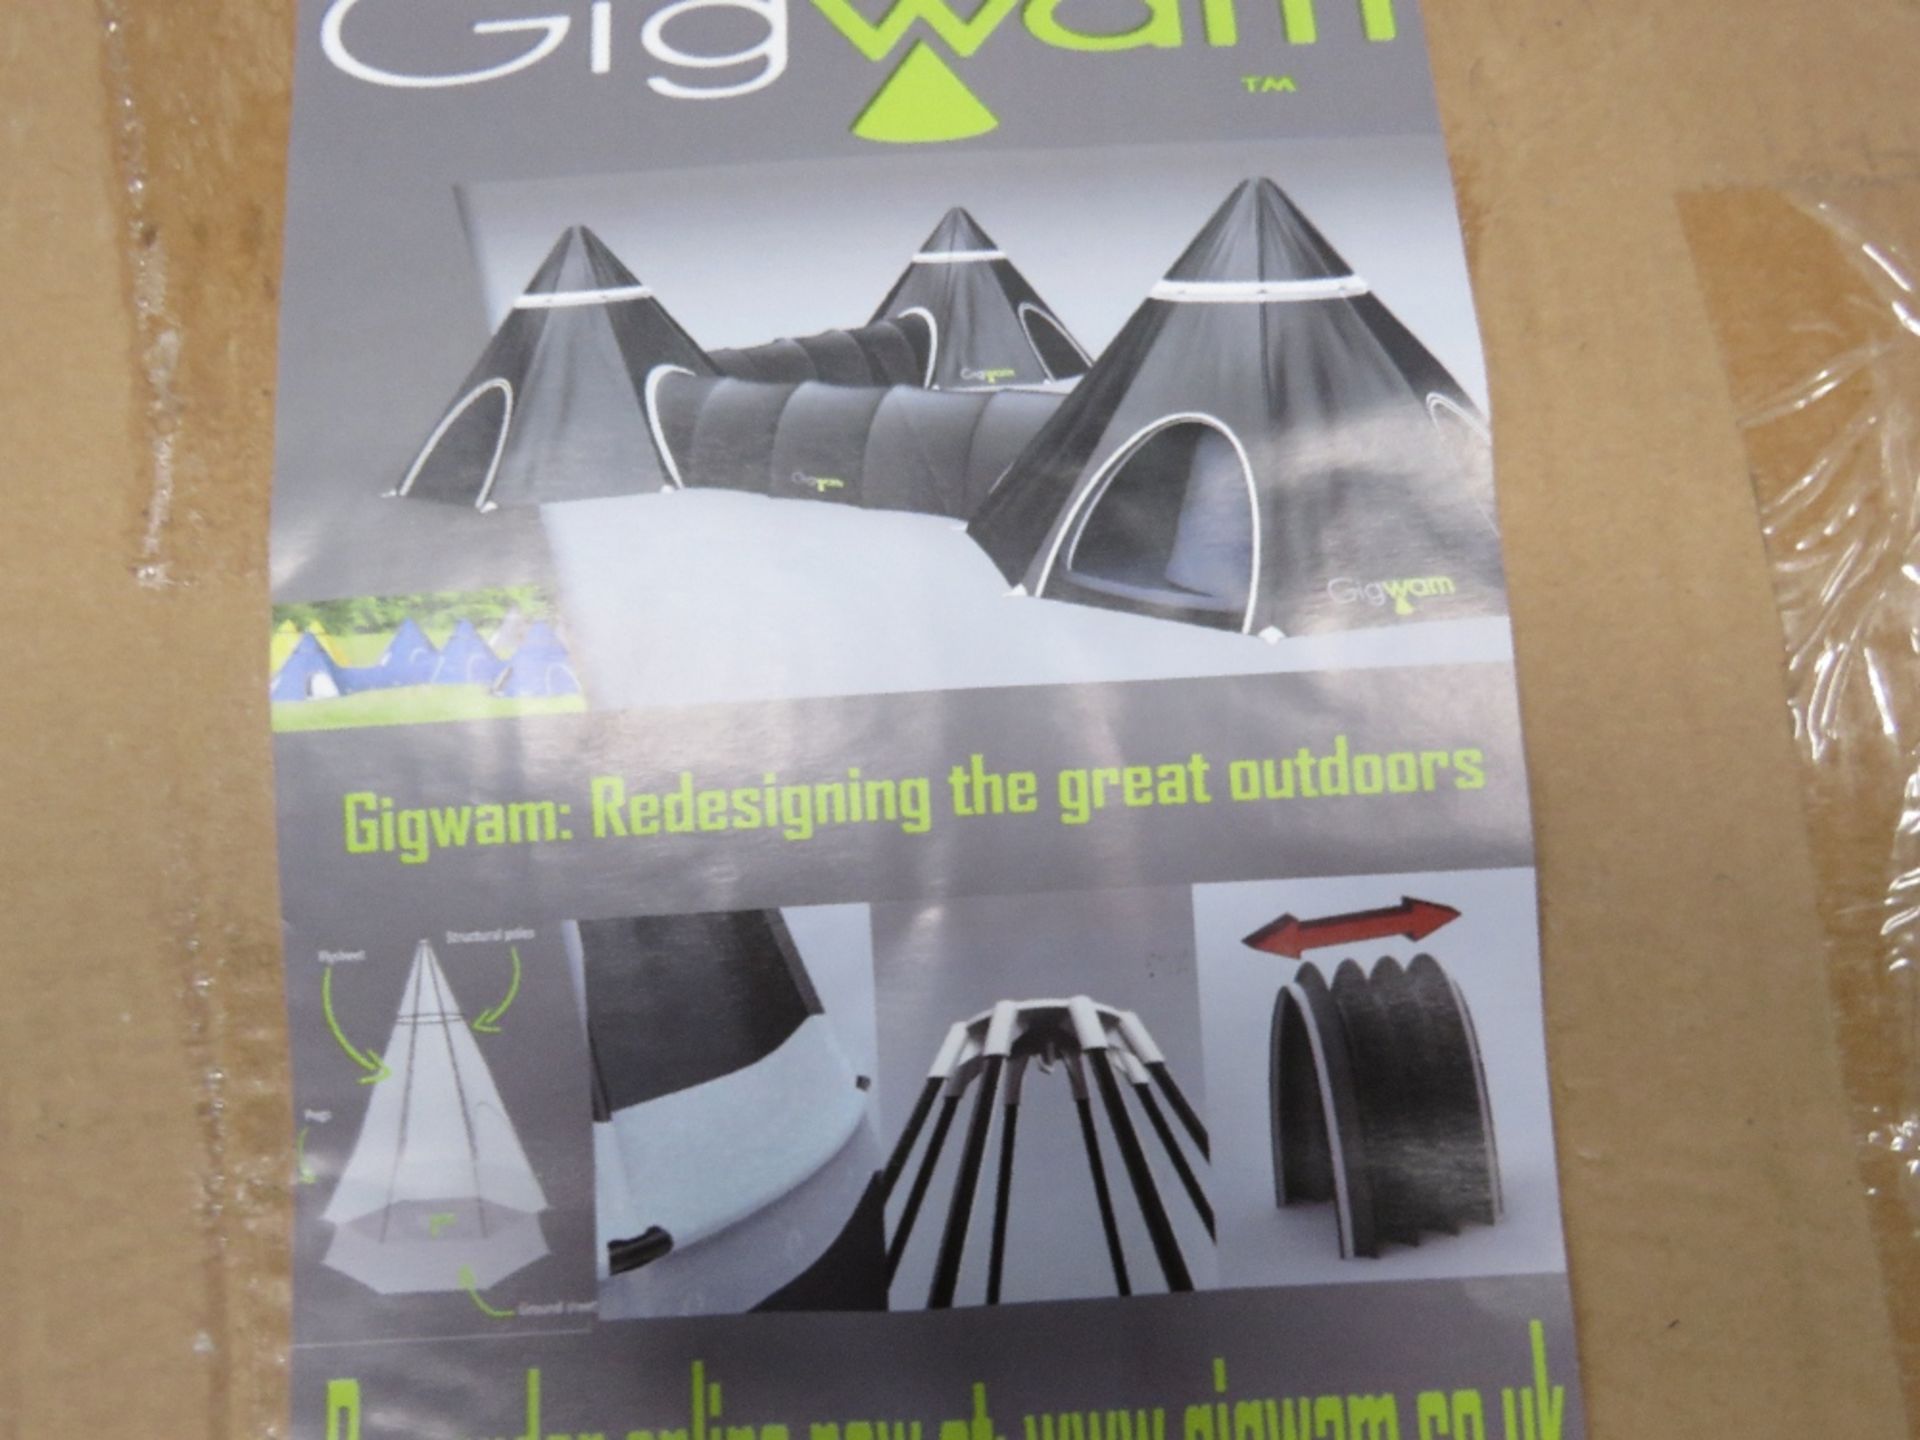 GIGWAM TENTS: 3 X BOXES CONTAINING 3 TENTS IN EACH. IDEAL FOR FESTIVALS ETC, THE TENTS HAVE A MAIN "